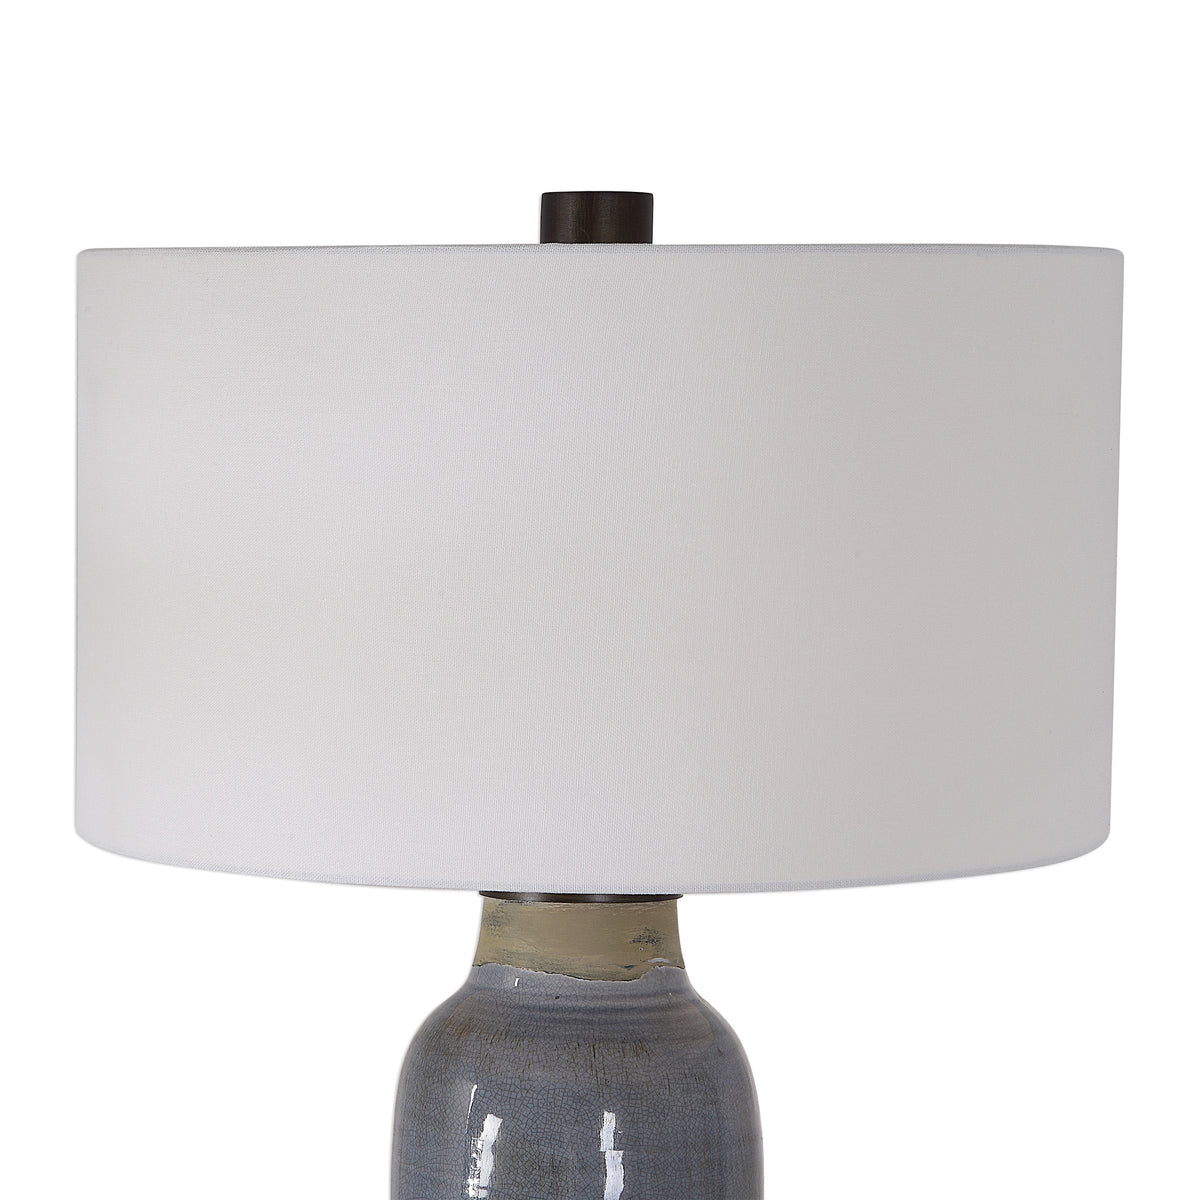 Vicente Table Lamp